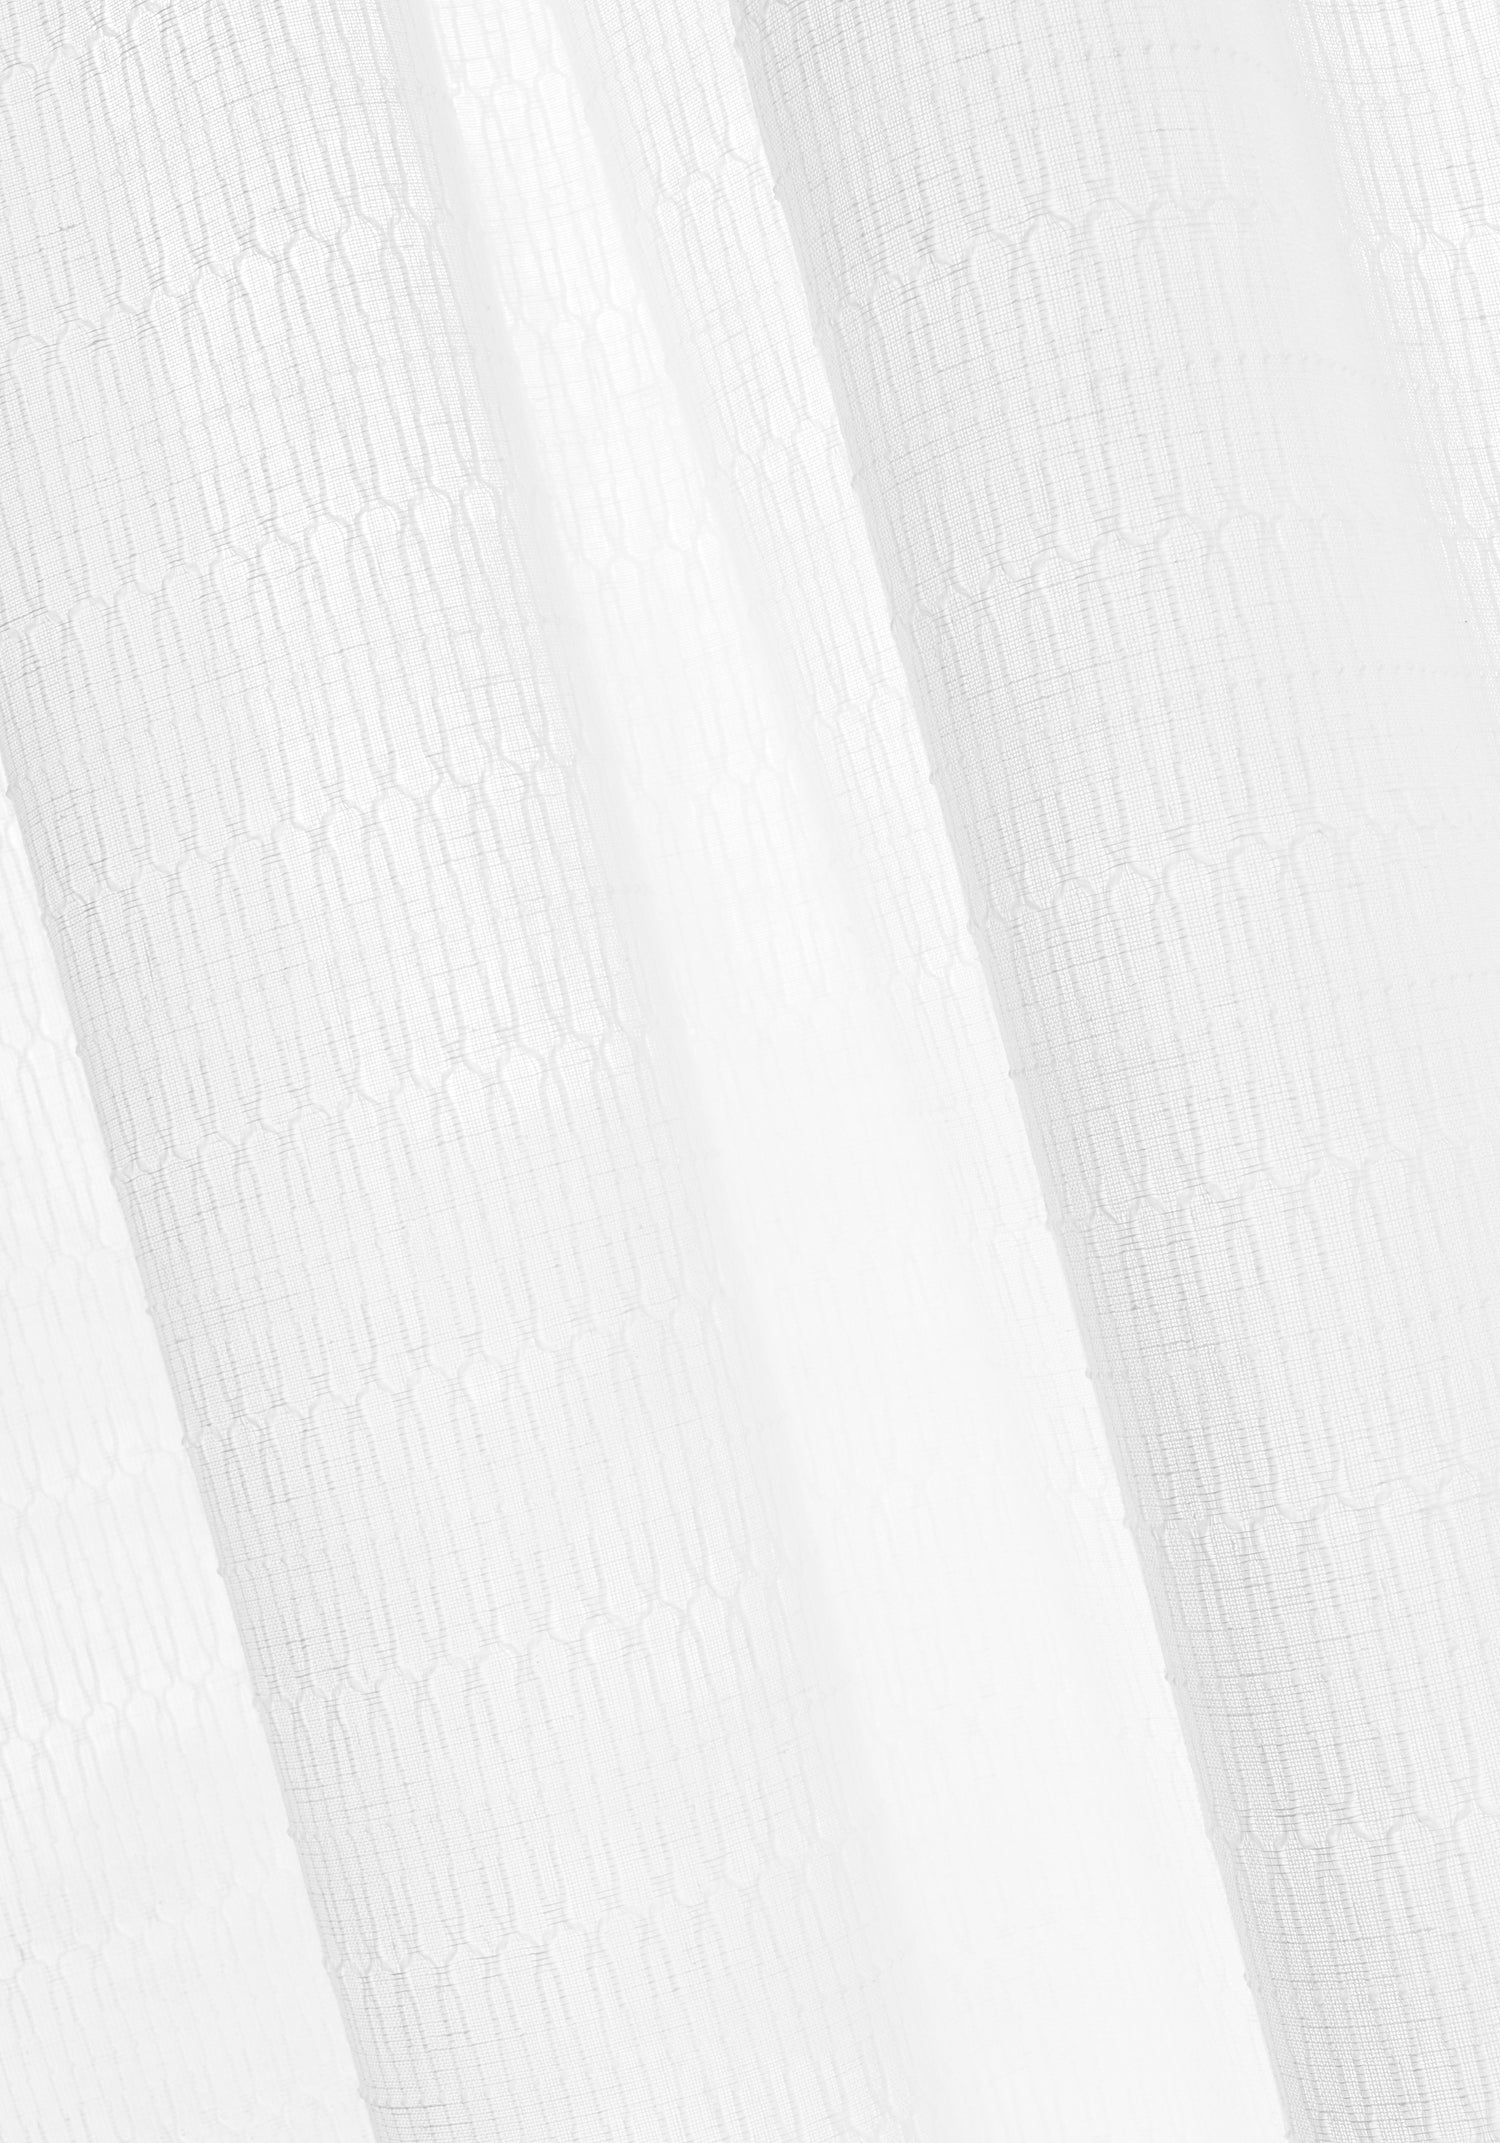 Thibaut Victoria Sheer fabric in snow white color - pattern number FWW7109 - in the Atmosphere collection